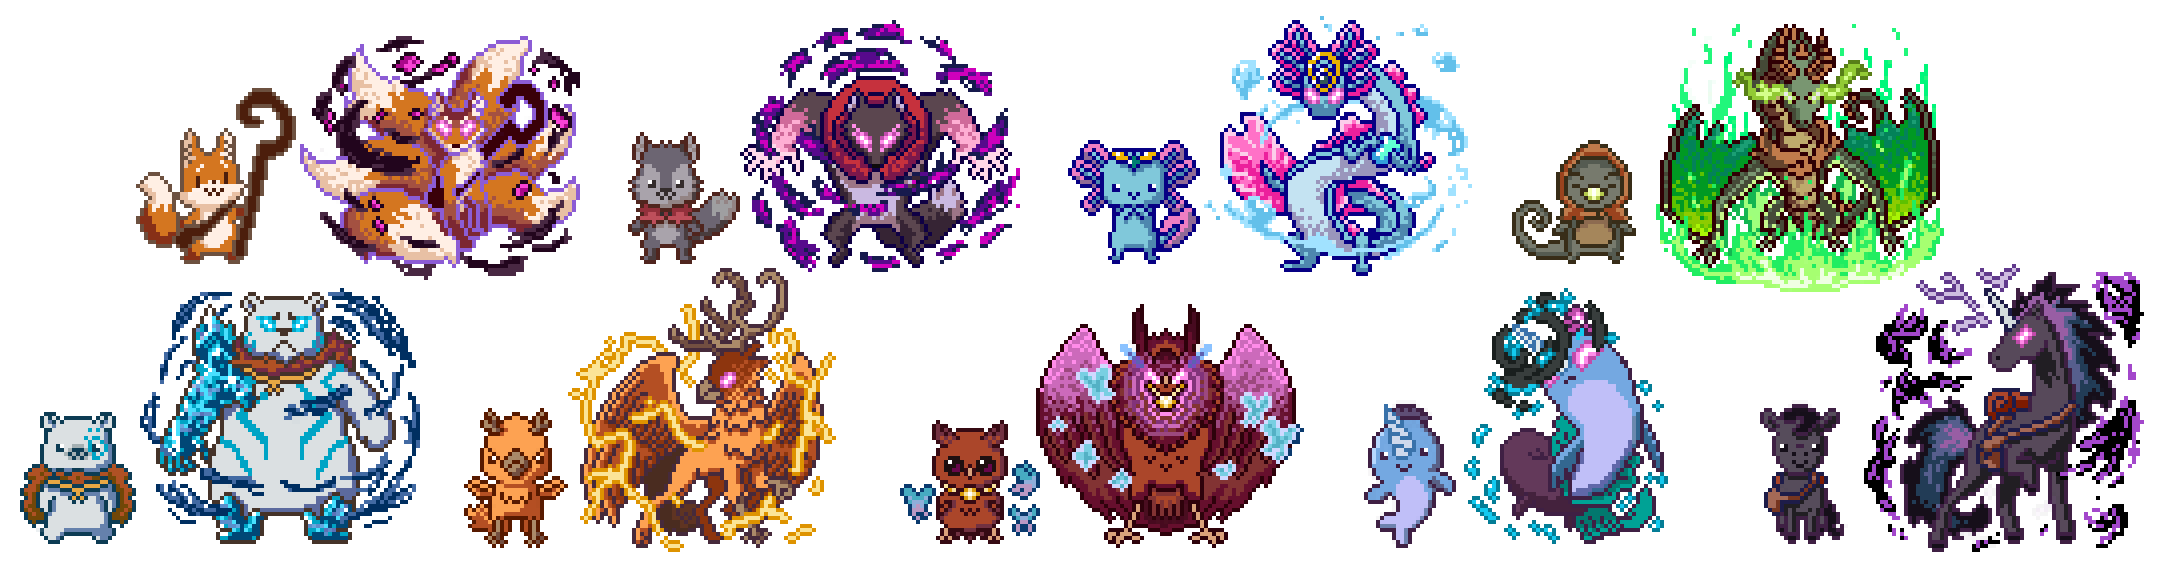 Casting Shadows All Characters Pixel Sprites by littlealliegator